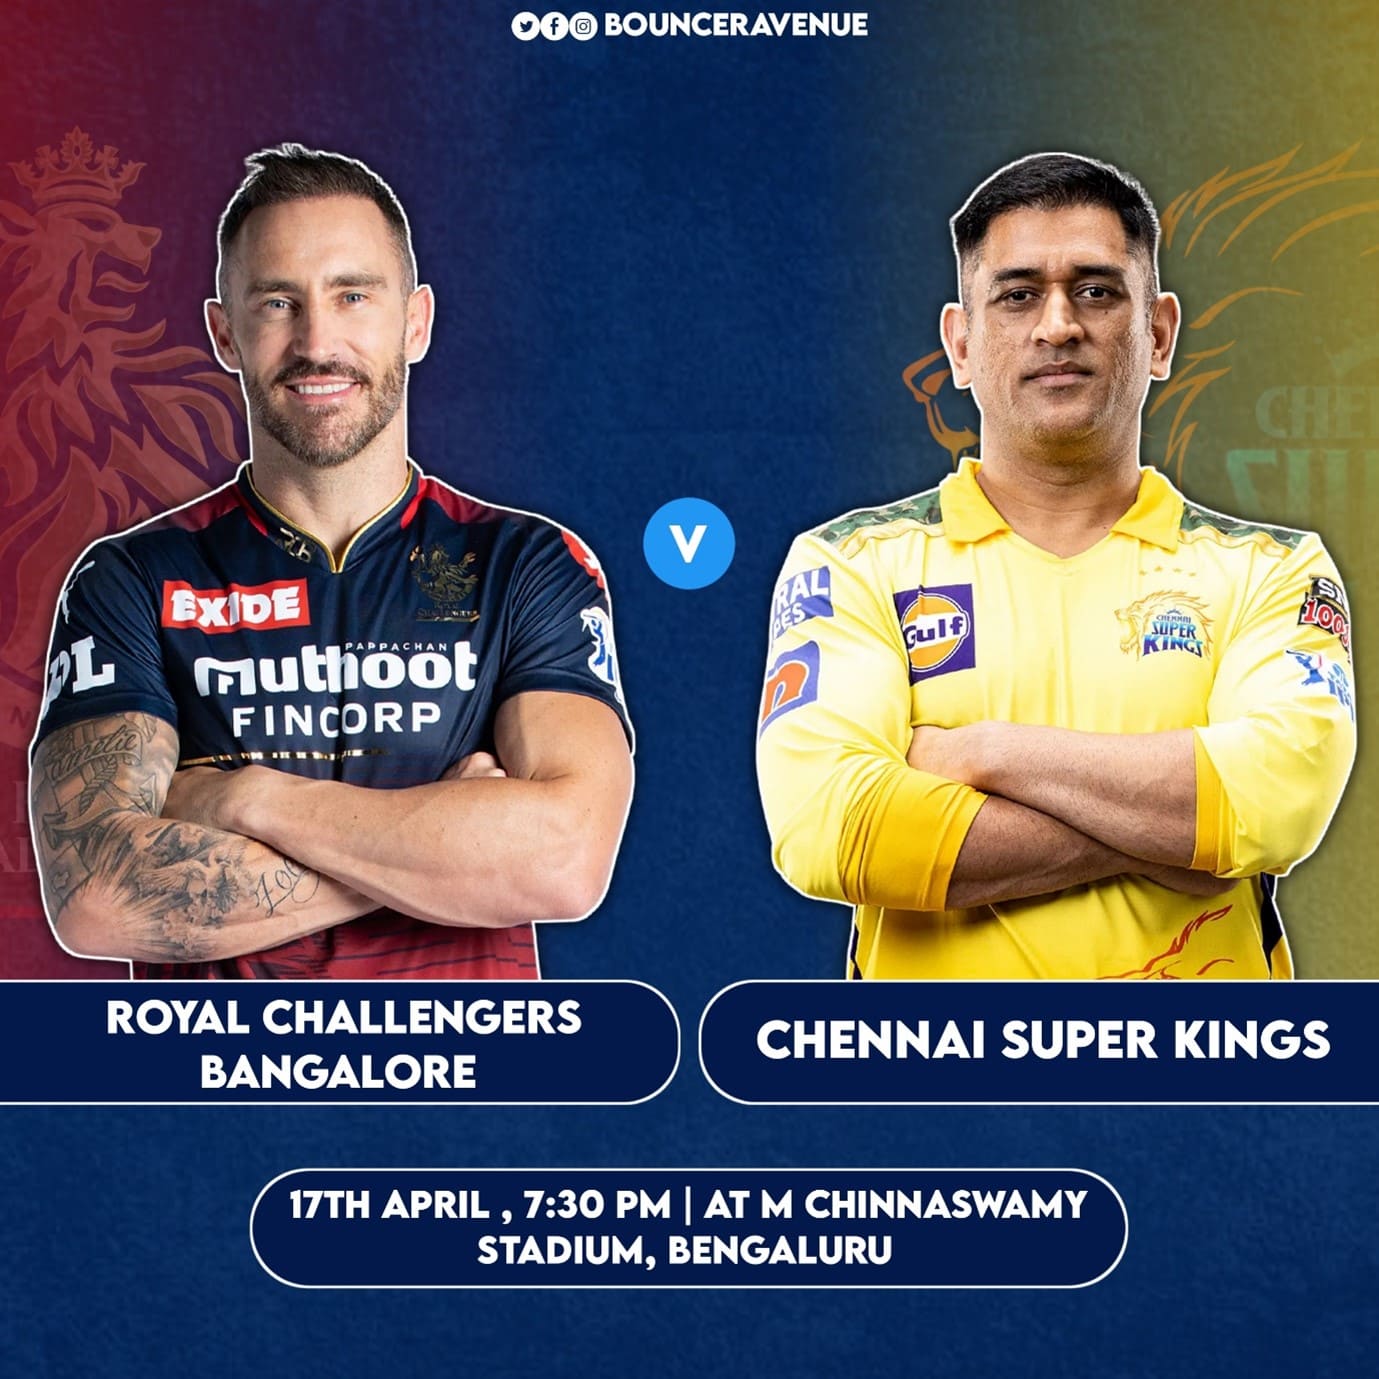 CSK Vs RCB - 22nd March, 6 PM TV Show: Watch All Seasons, Full Episodes &  Videos Online In HD Quality On JioCinema